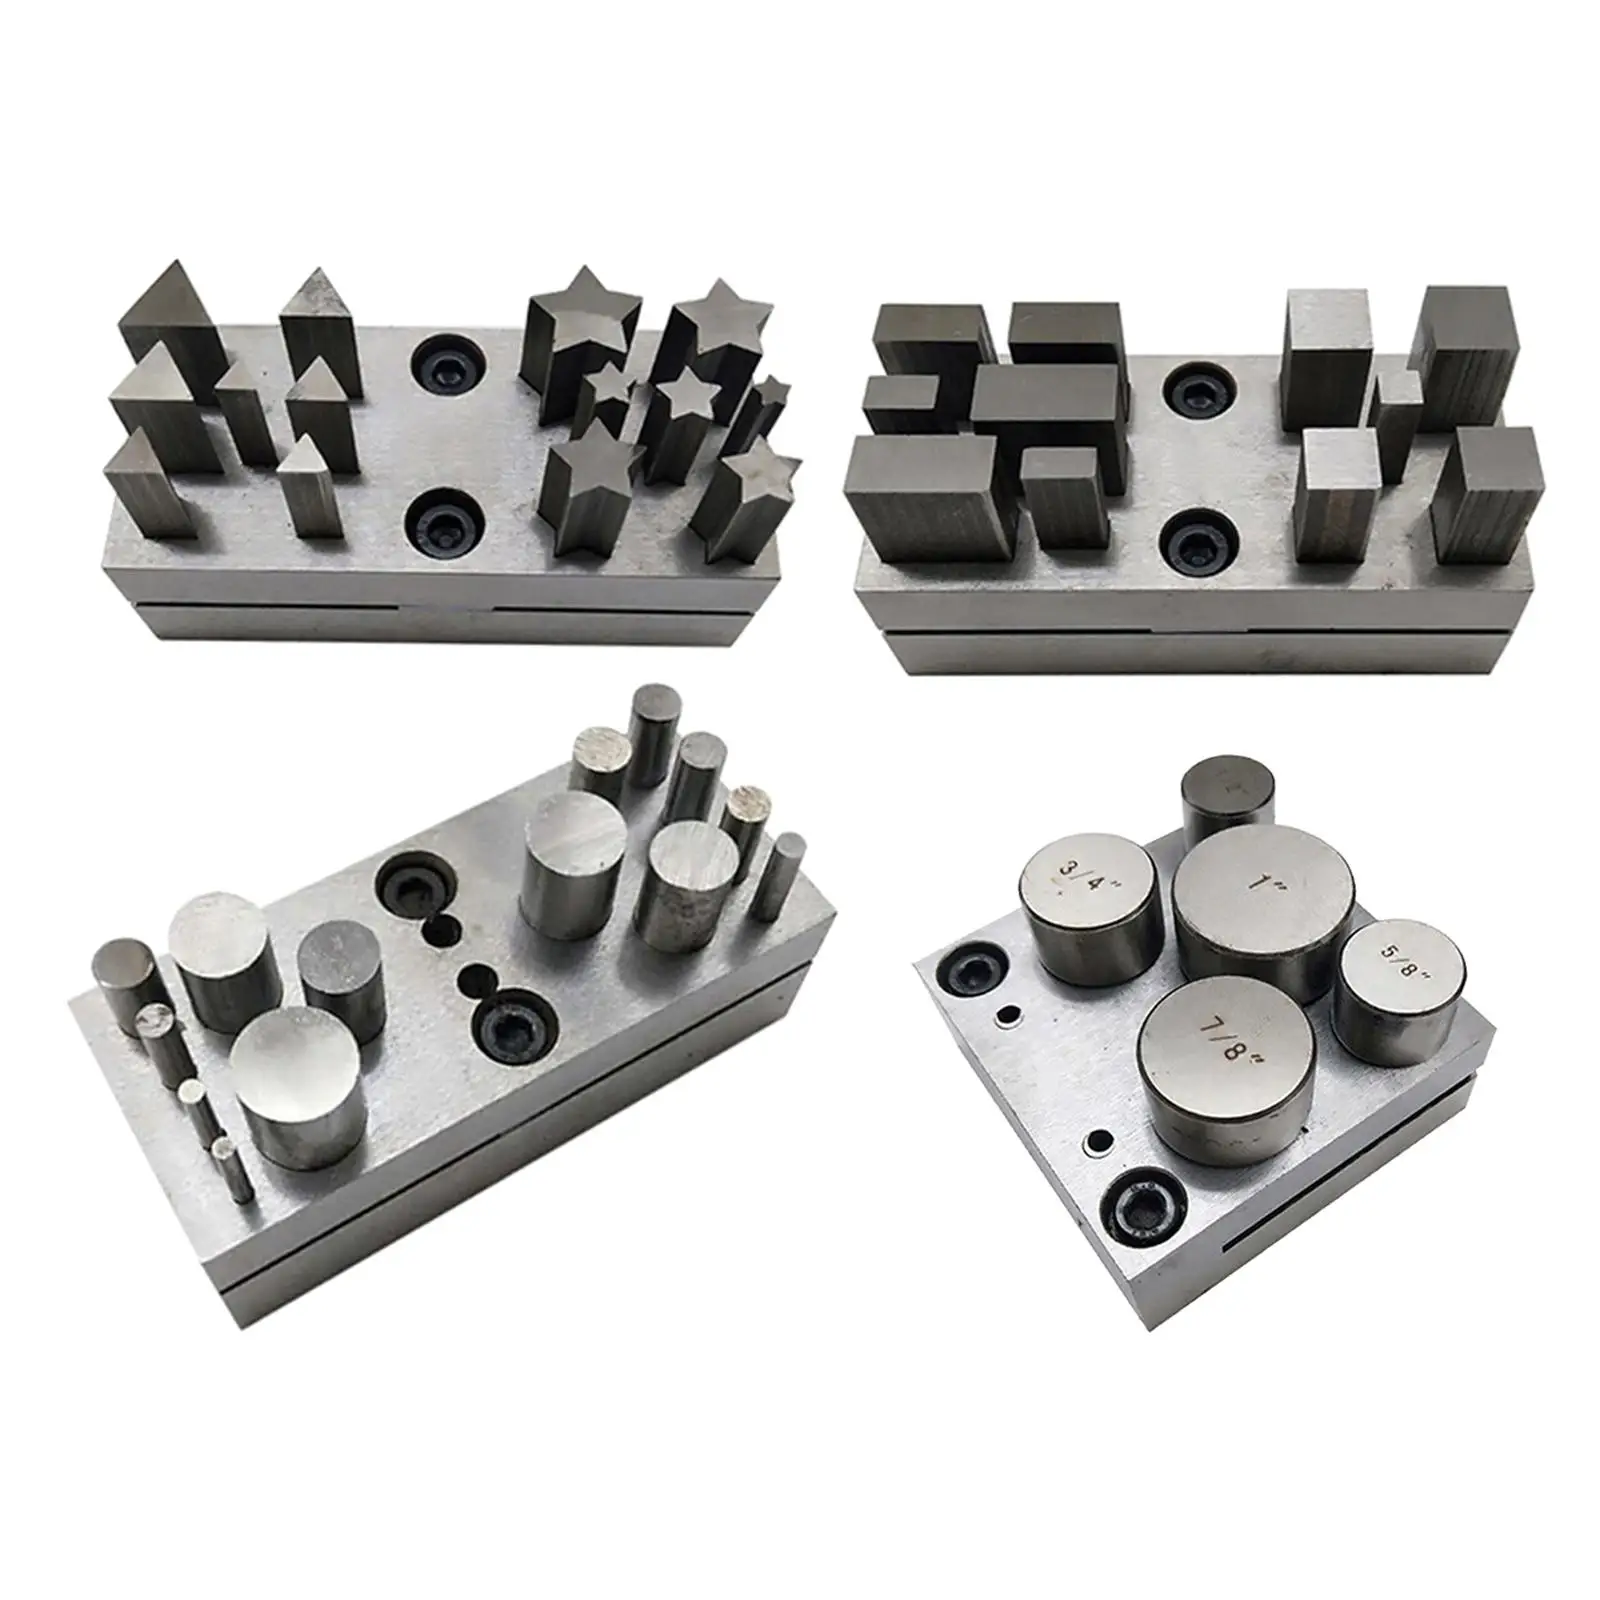 Disc Cutter Cavity Punch Set Tool Metal Cutting Punched Hole  Jewelry Tools for Jeweler Eyelet Work